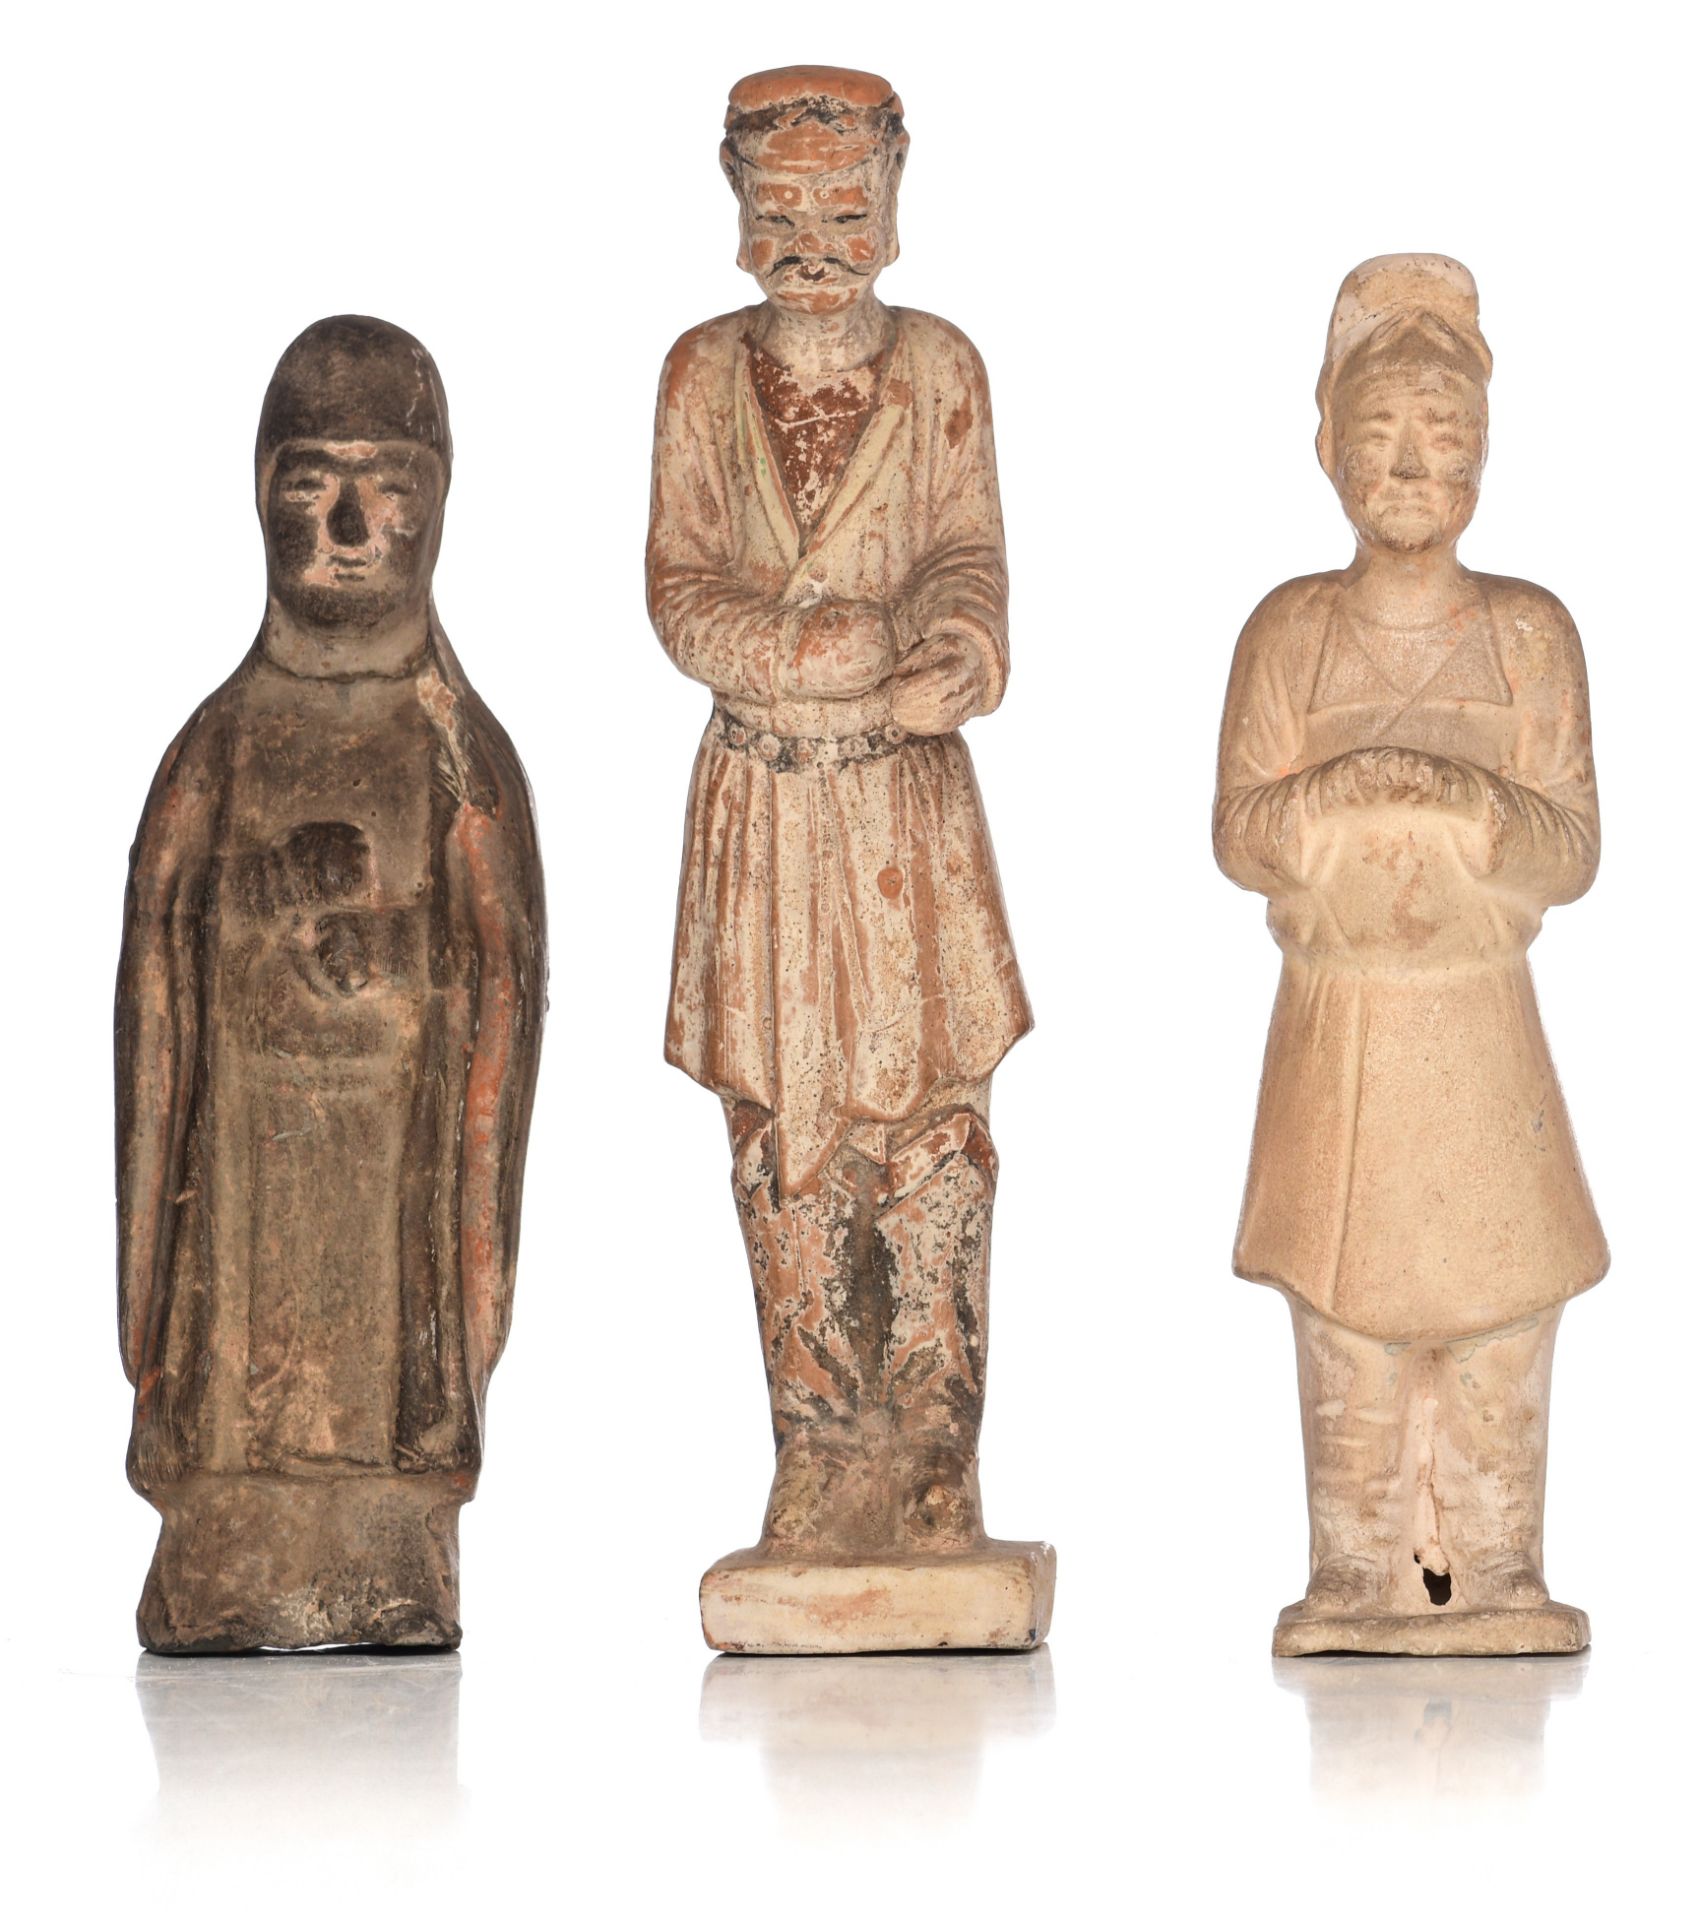 A collection of Chinese (straw-glazed) pottery ware, Northern Wei - Tang dynasty, tallest H 29,5 cm - Image 8 of 15